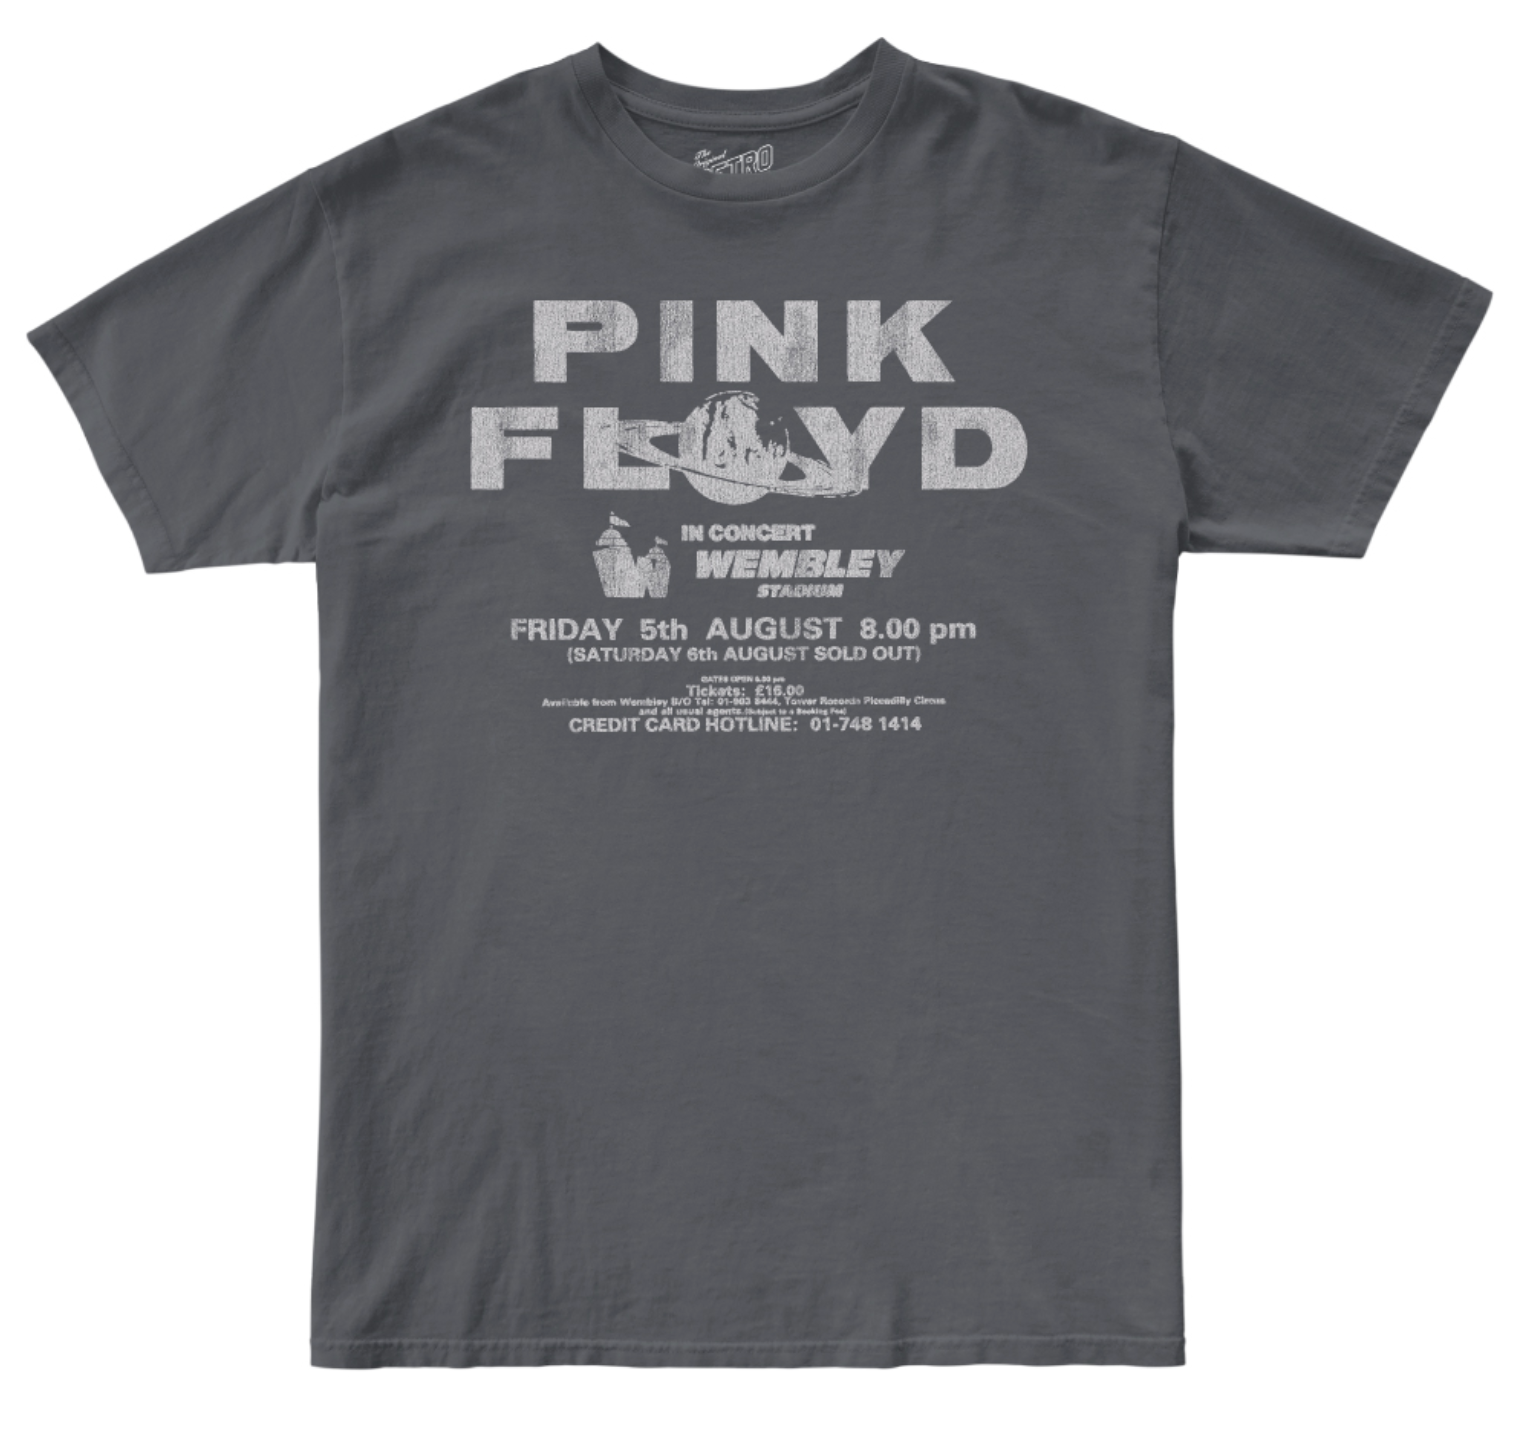 Pink Floyd Live at Wembley 100% Cotton Unisex Tee